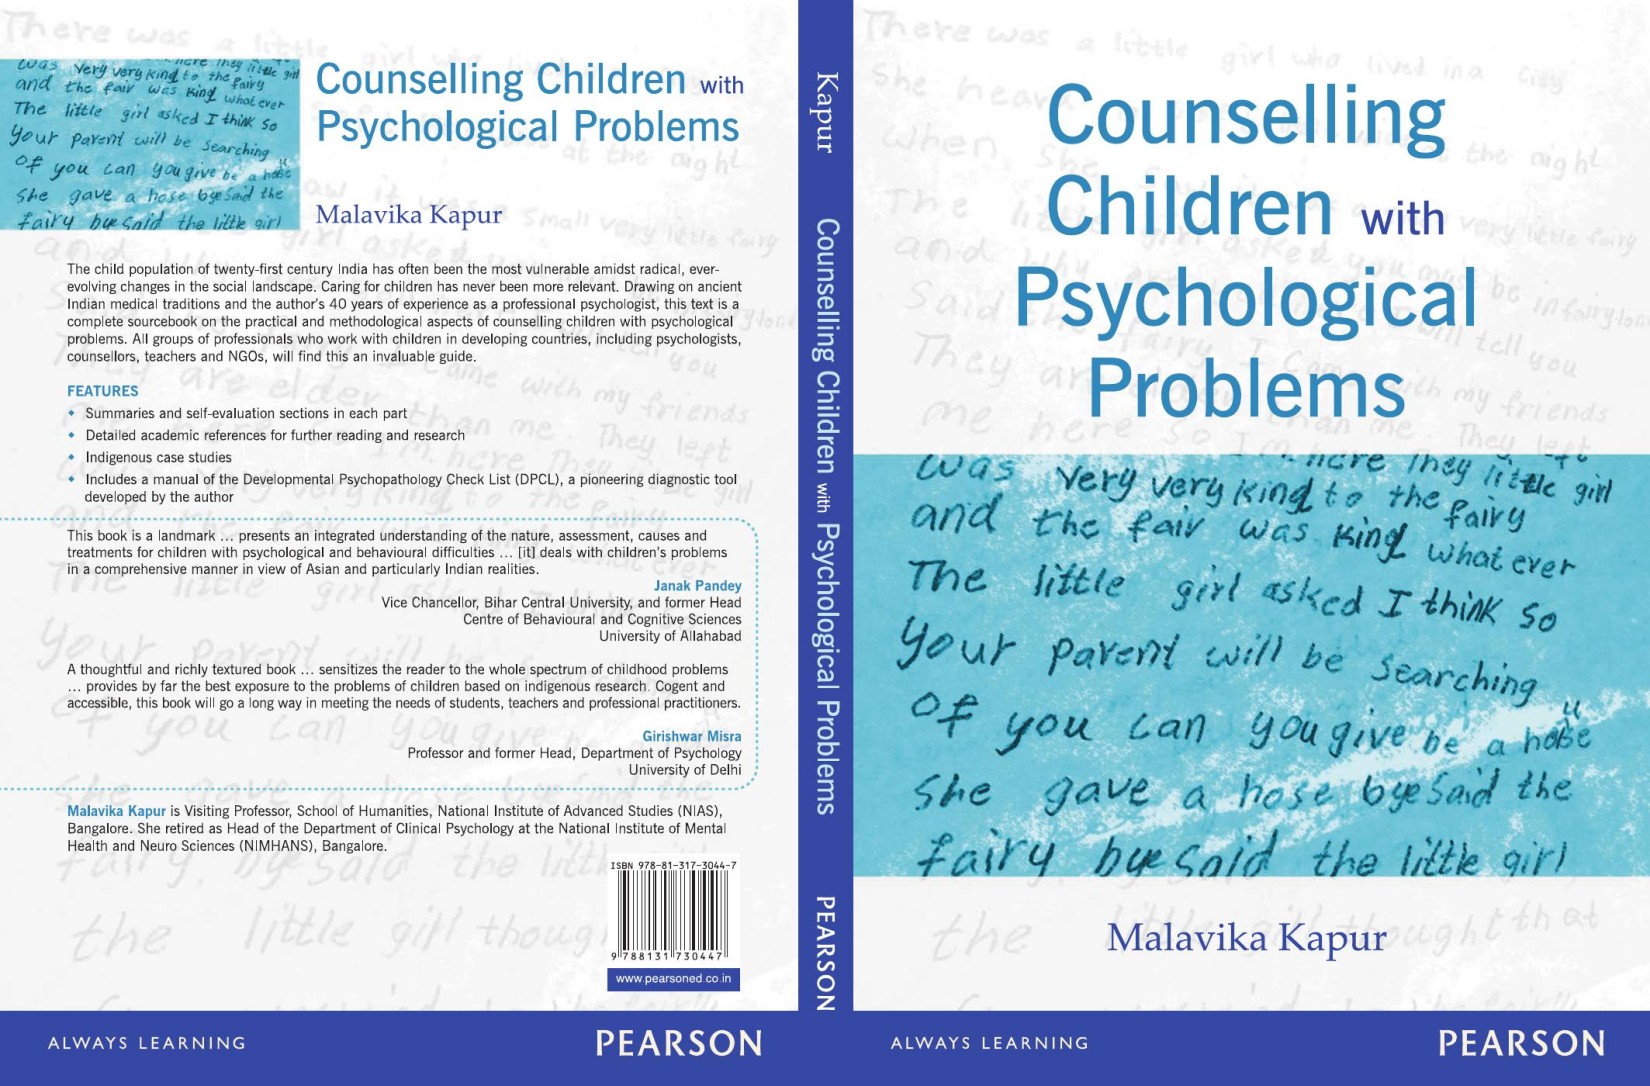 Counselling Children with Psychological Problems 2011